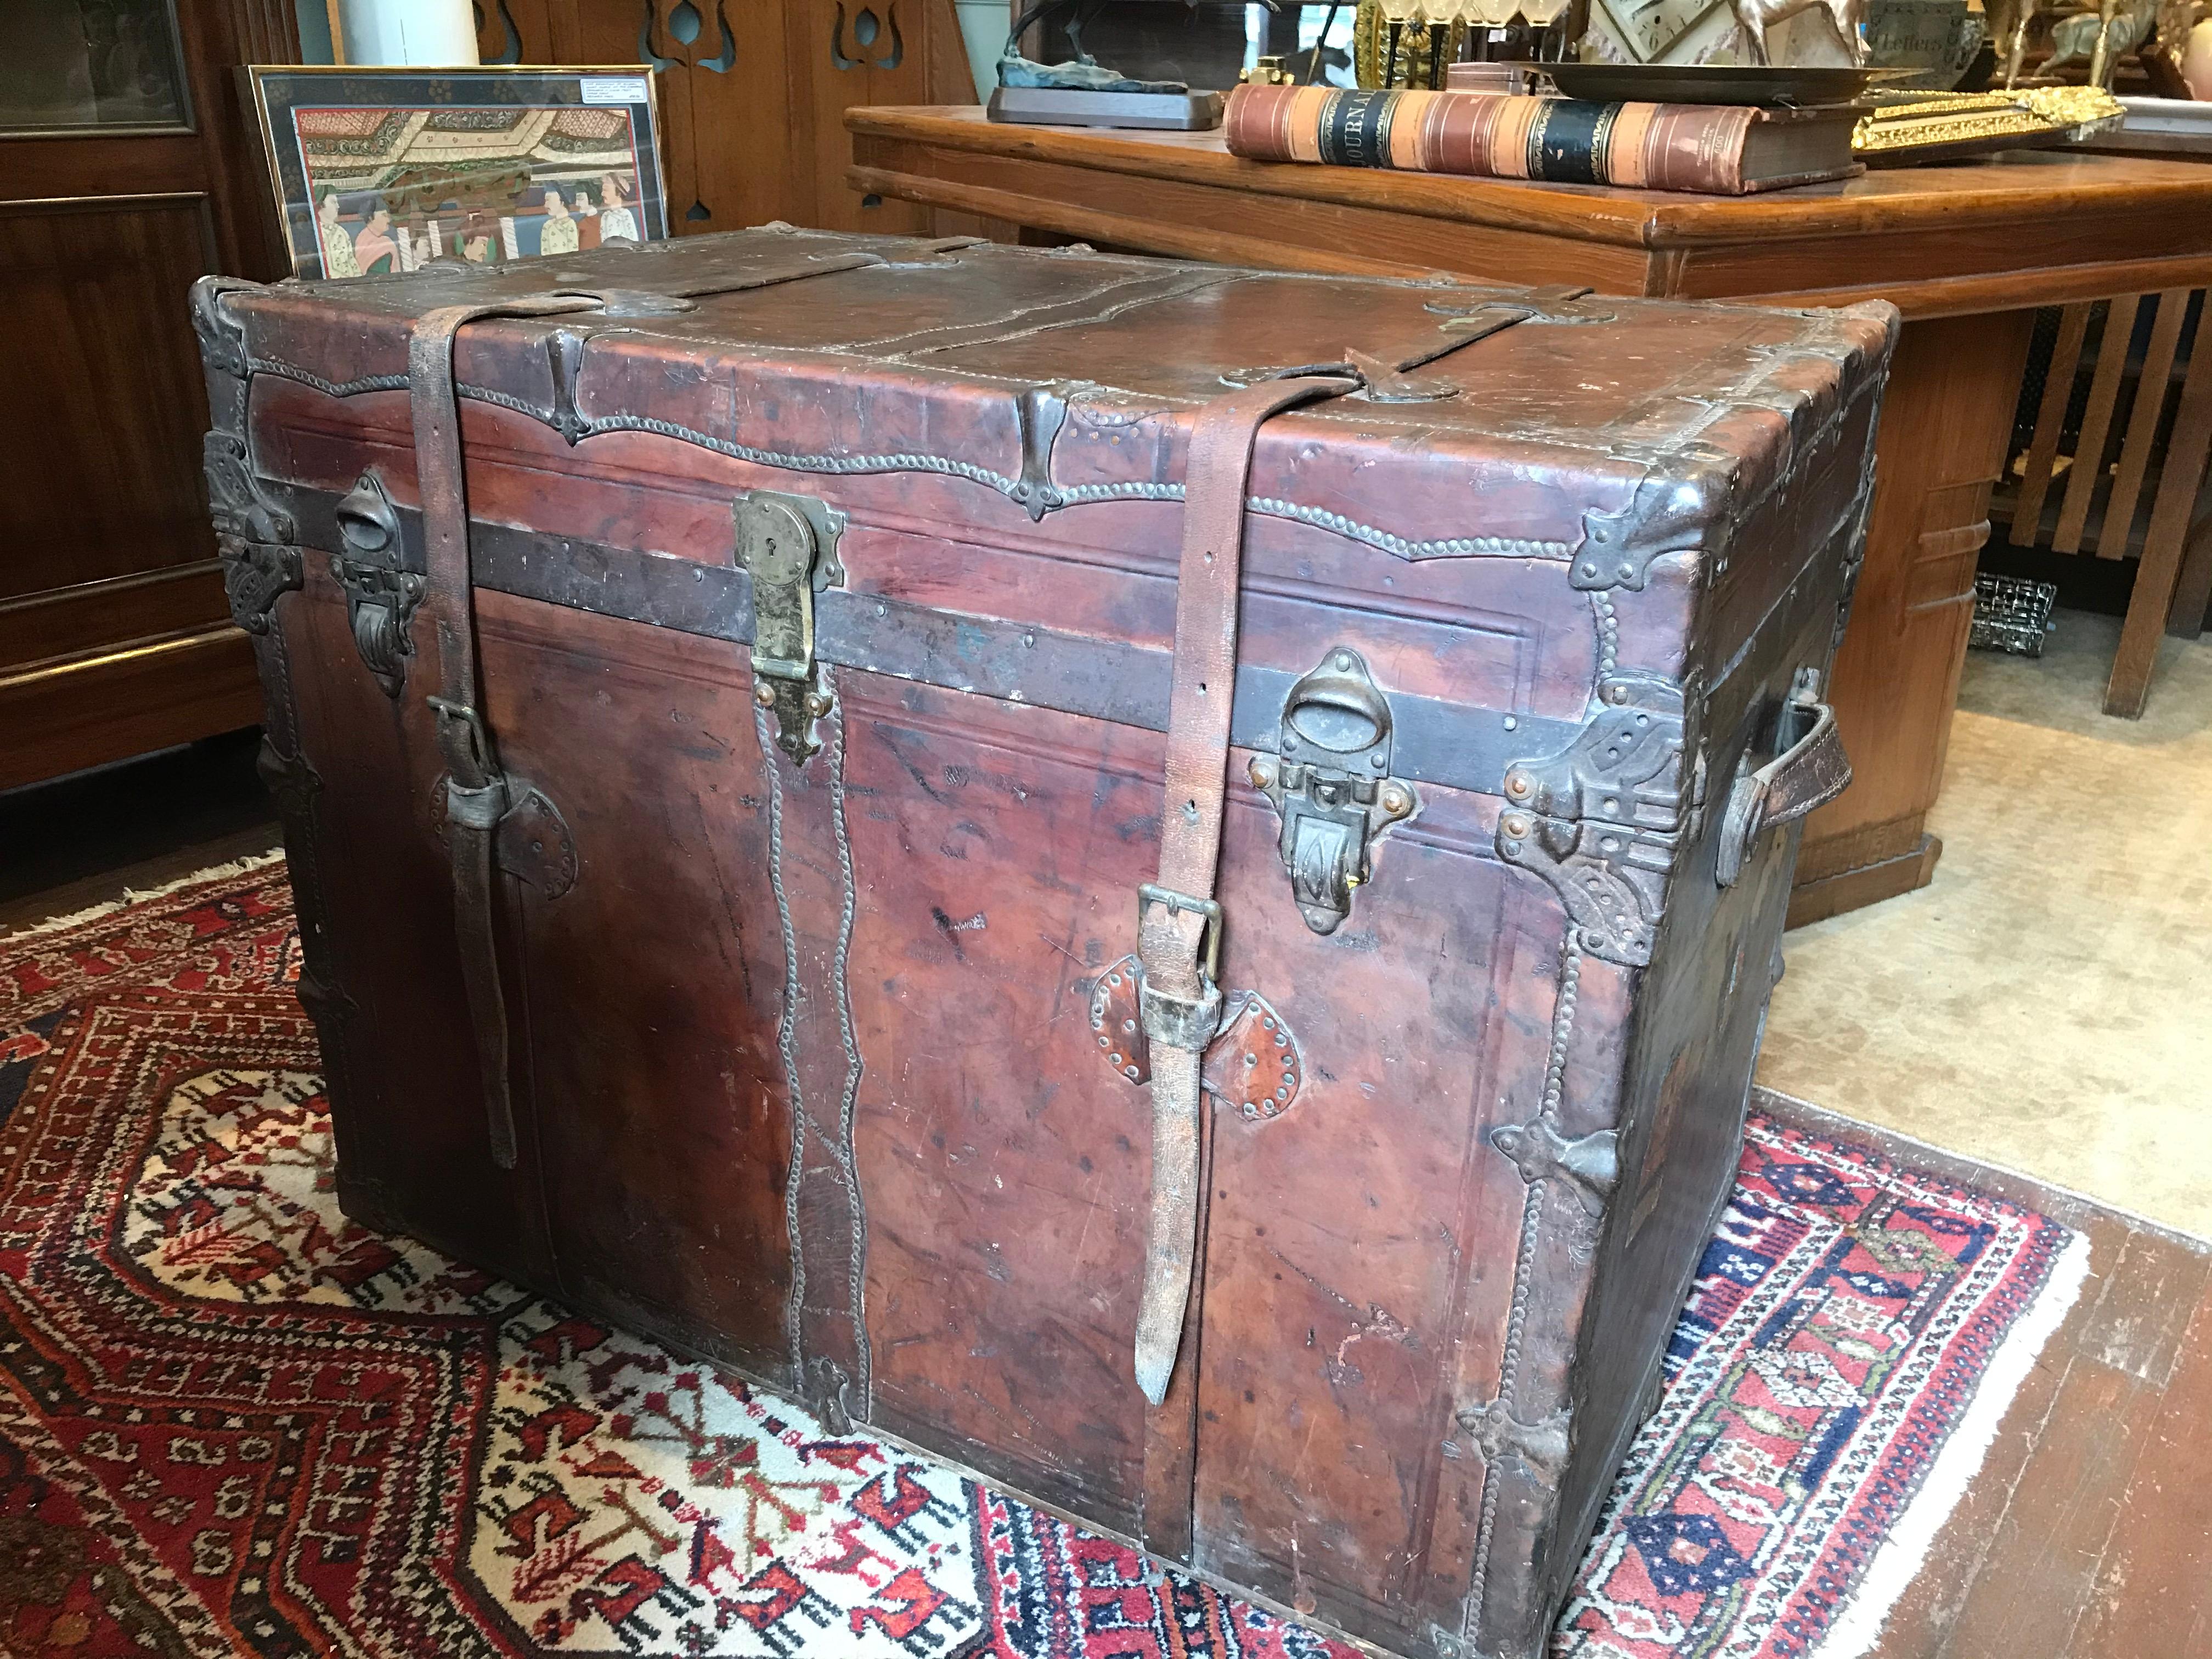 Rare all leather late Victorian Steamship Trunk in very good original intact condition. Unrestored with authentic patina and oozing charm and history down to export tags showing origin as Massachusetts and Destination as Victoria, BC. This is one